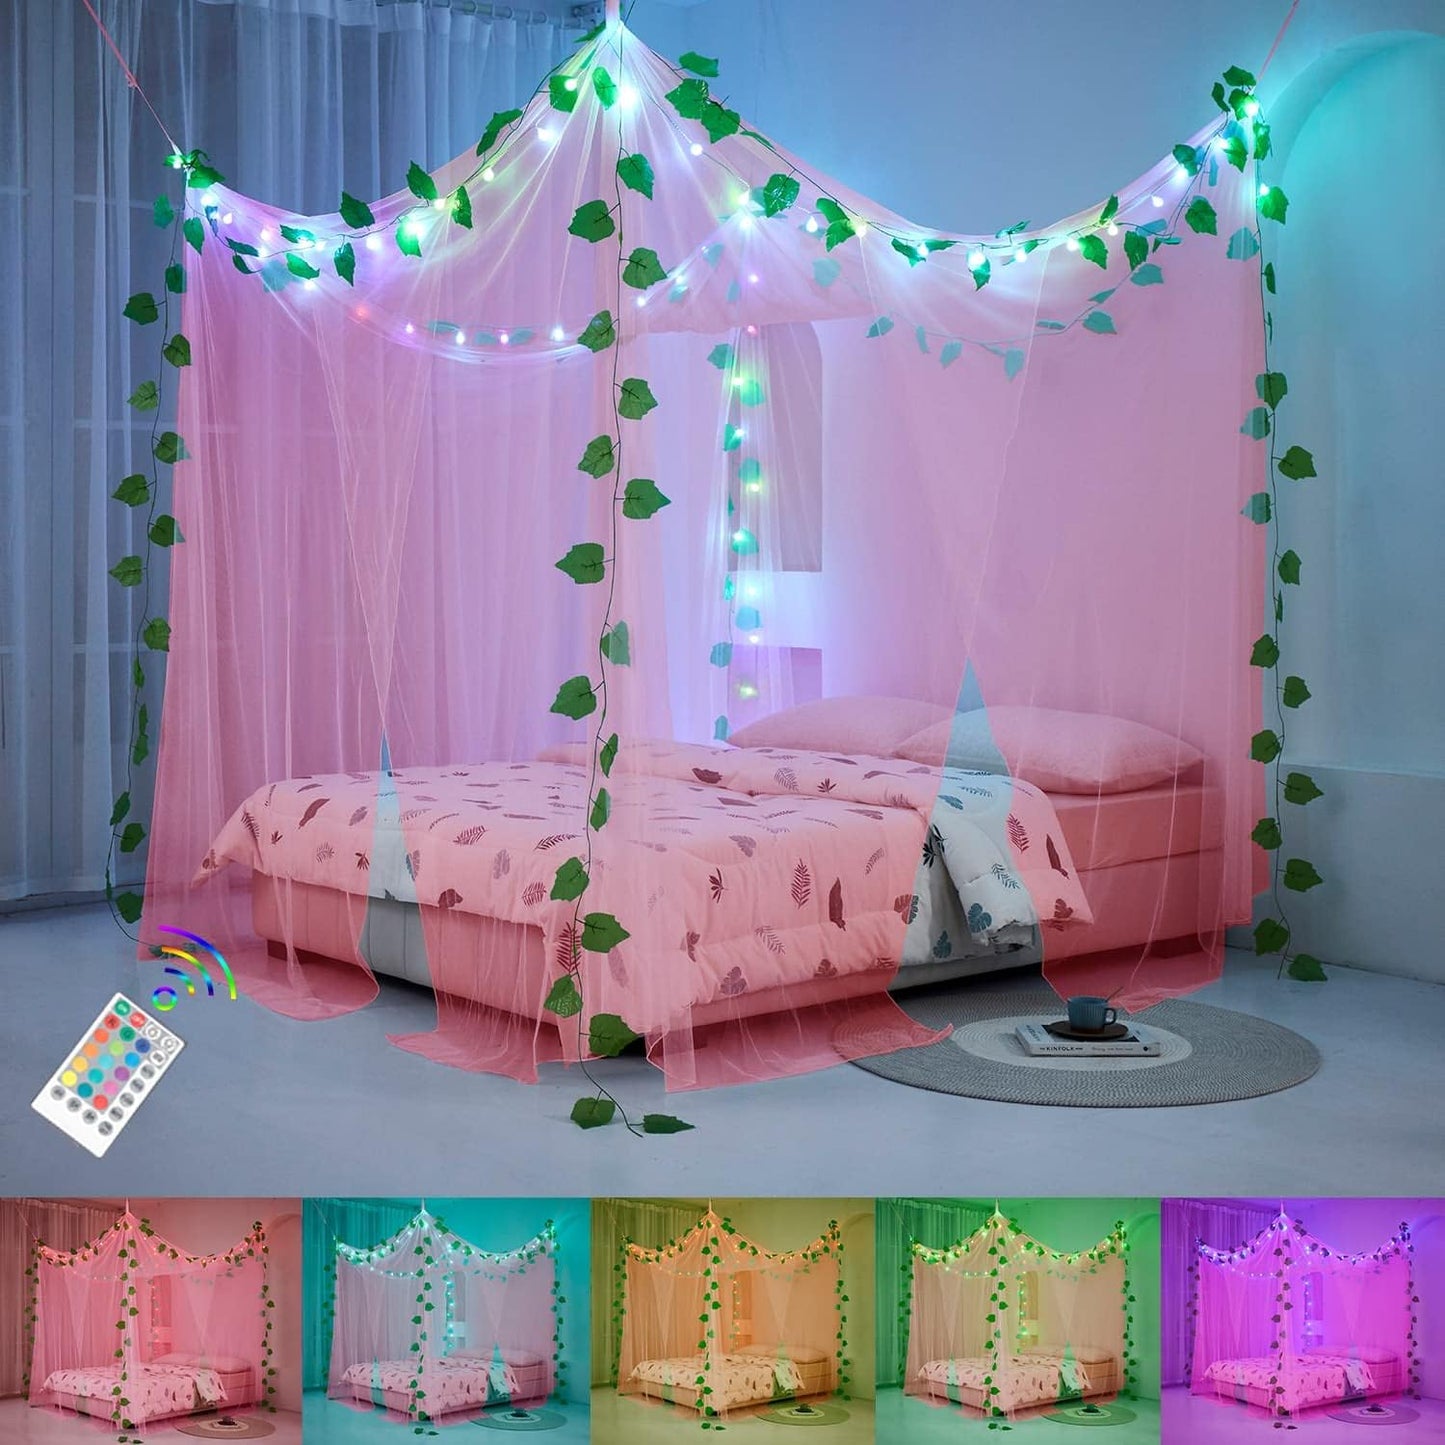 Akiky Princess Canopy Bed Curtains Bed Canopy Curtains with Lights for Queen Size Bed Drapes,8 Panels Canopies with 2 Lights,Room Décor (Full/Queen, White)  Akiky Pink-01 Queen/King 